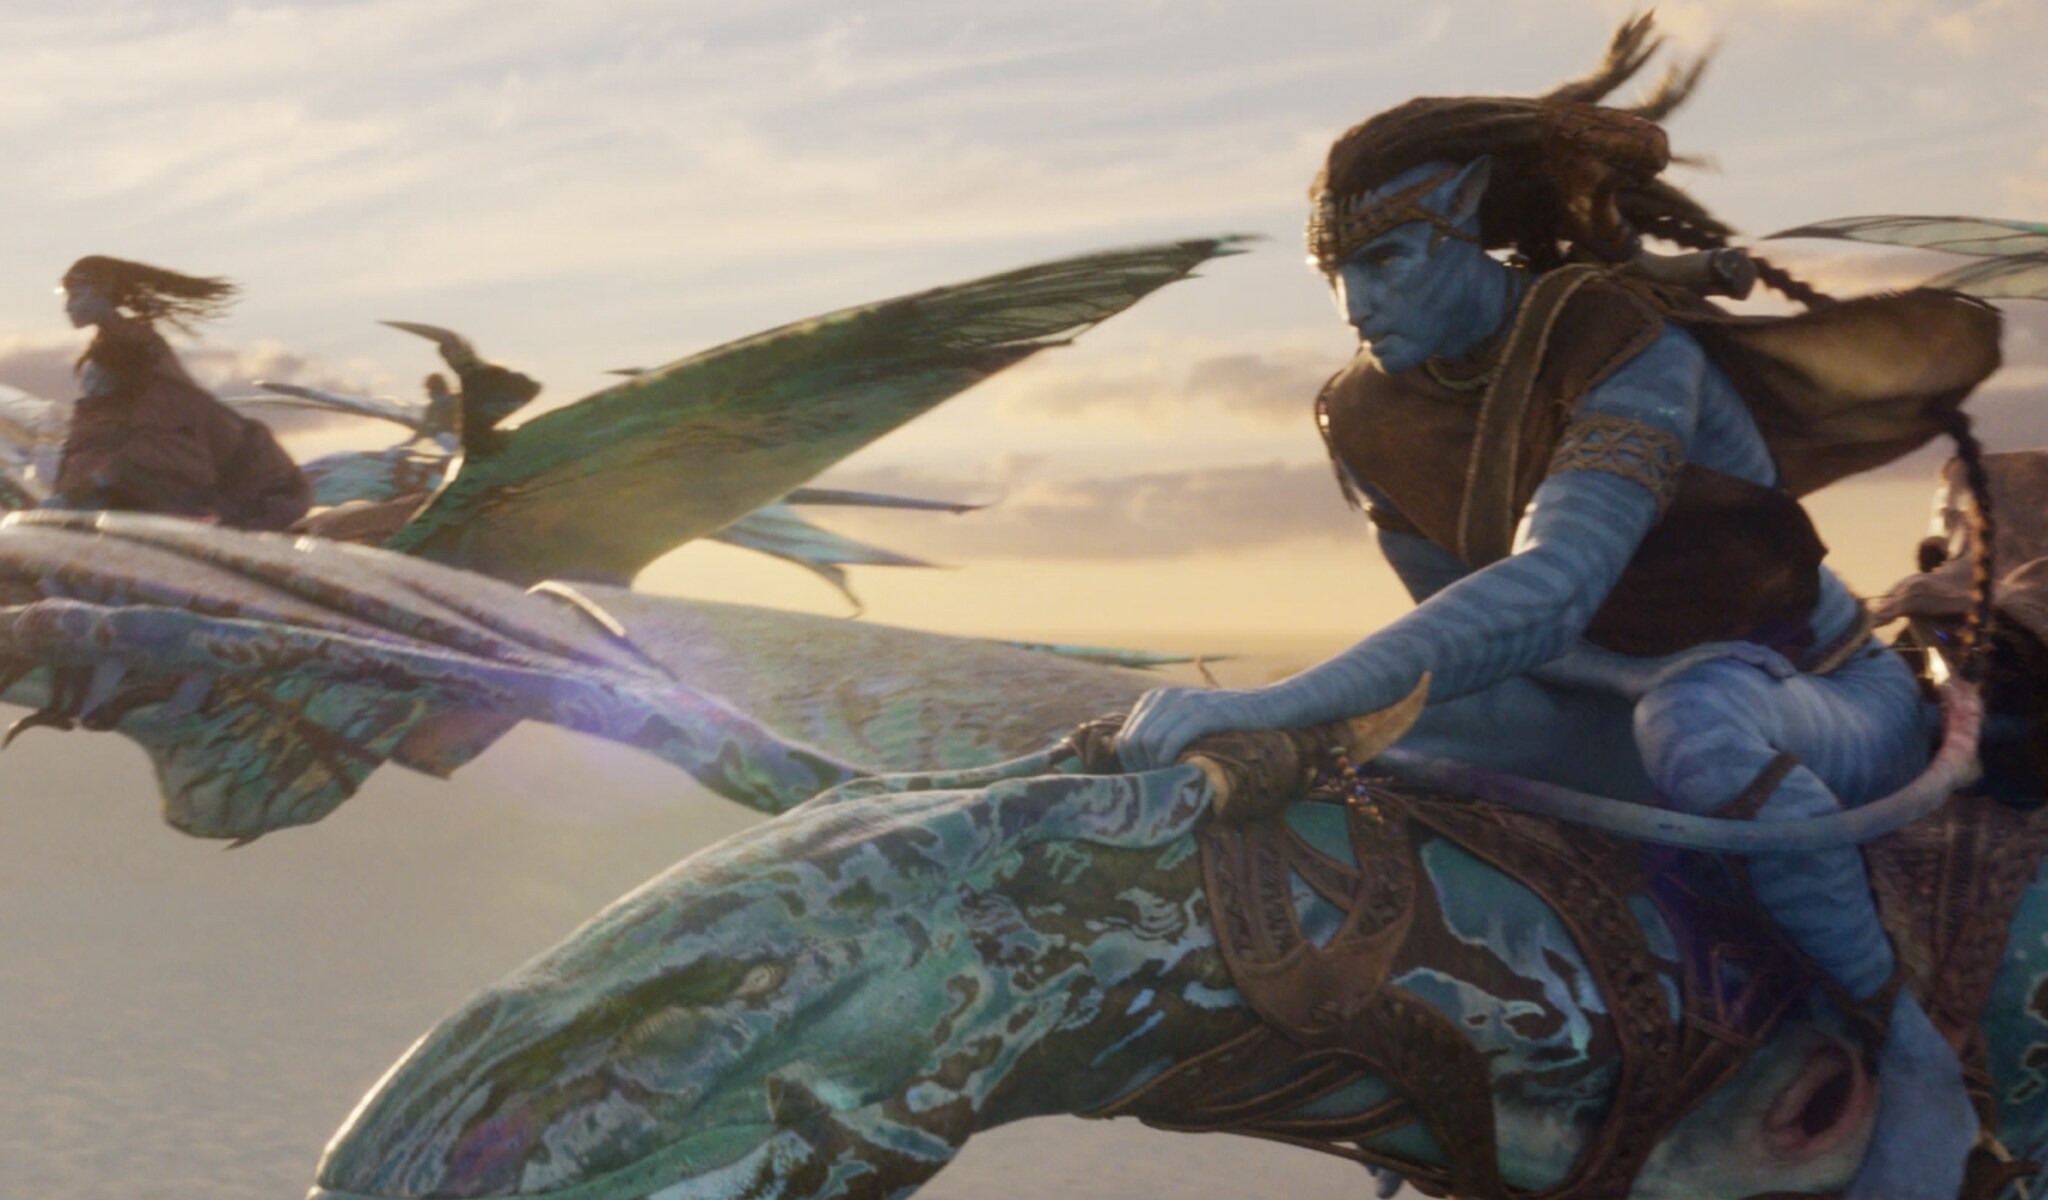 WATCH Avatar The Way of Water trailer released by 20th Century Studios